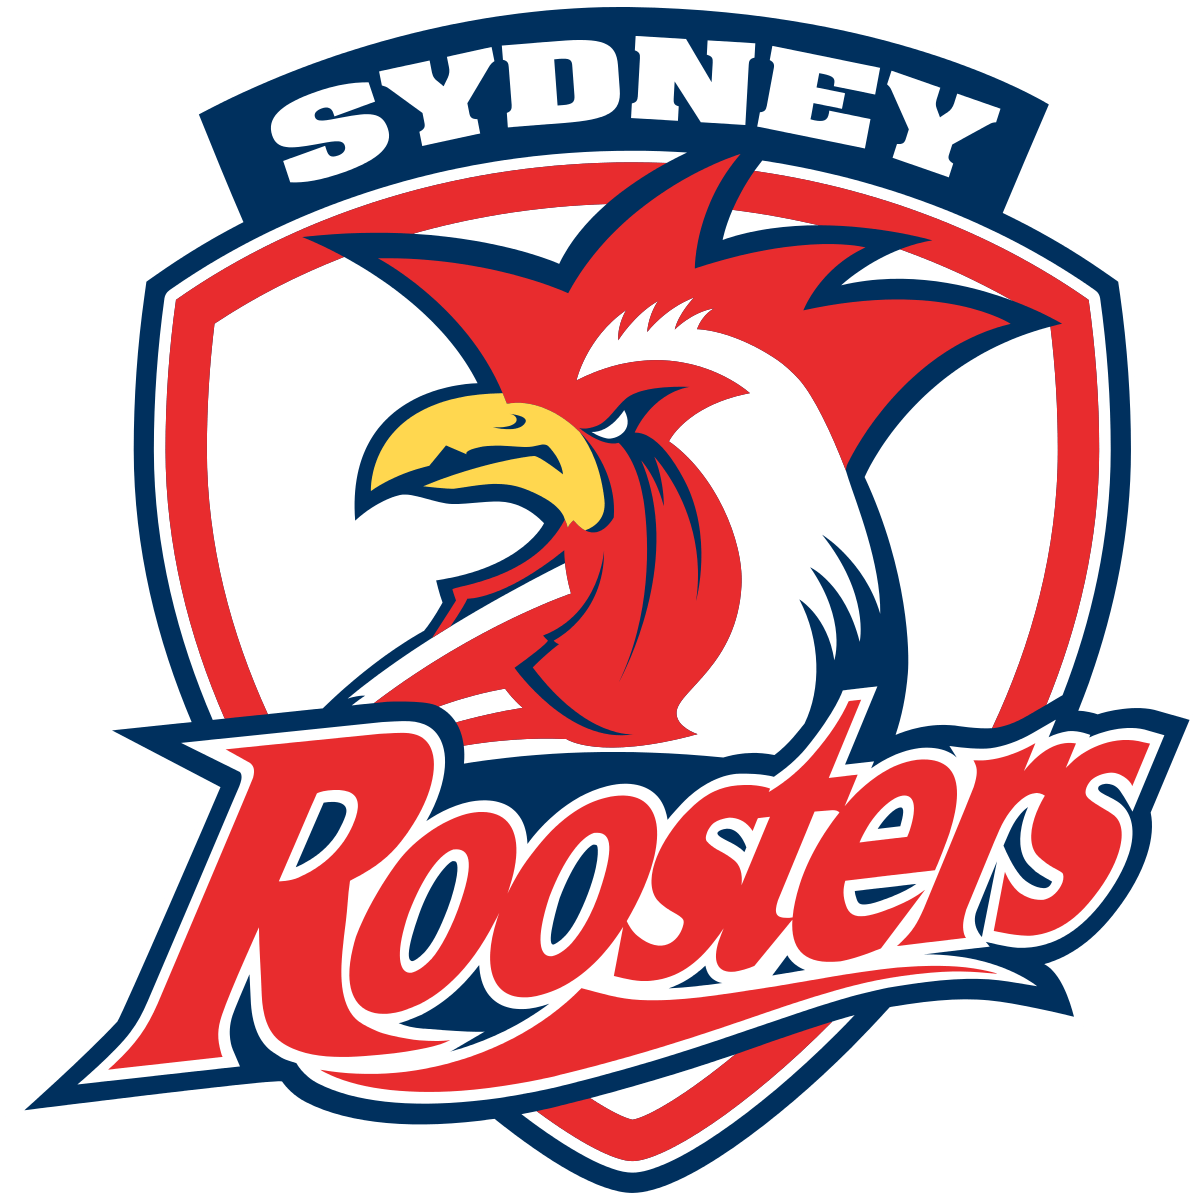 Rooster with Three Logo - Sydney Roosters